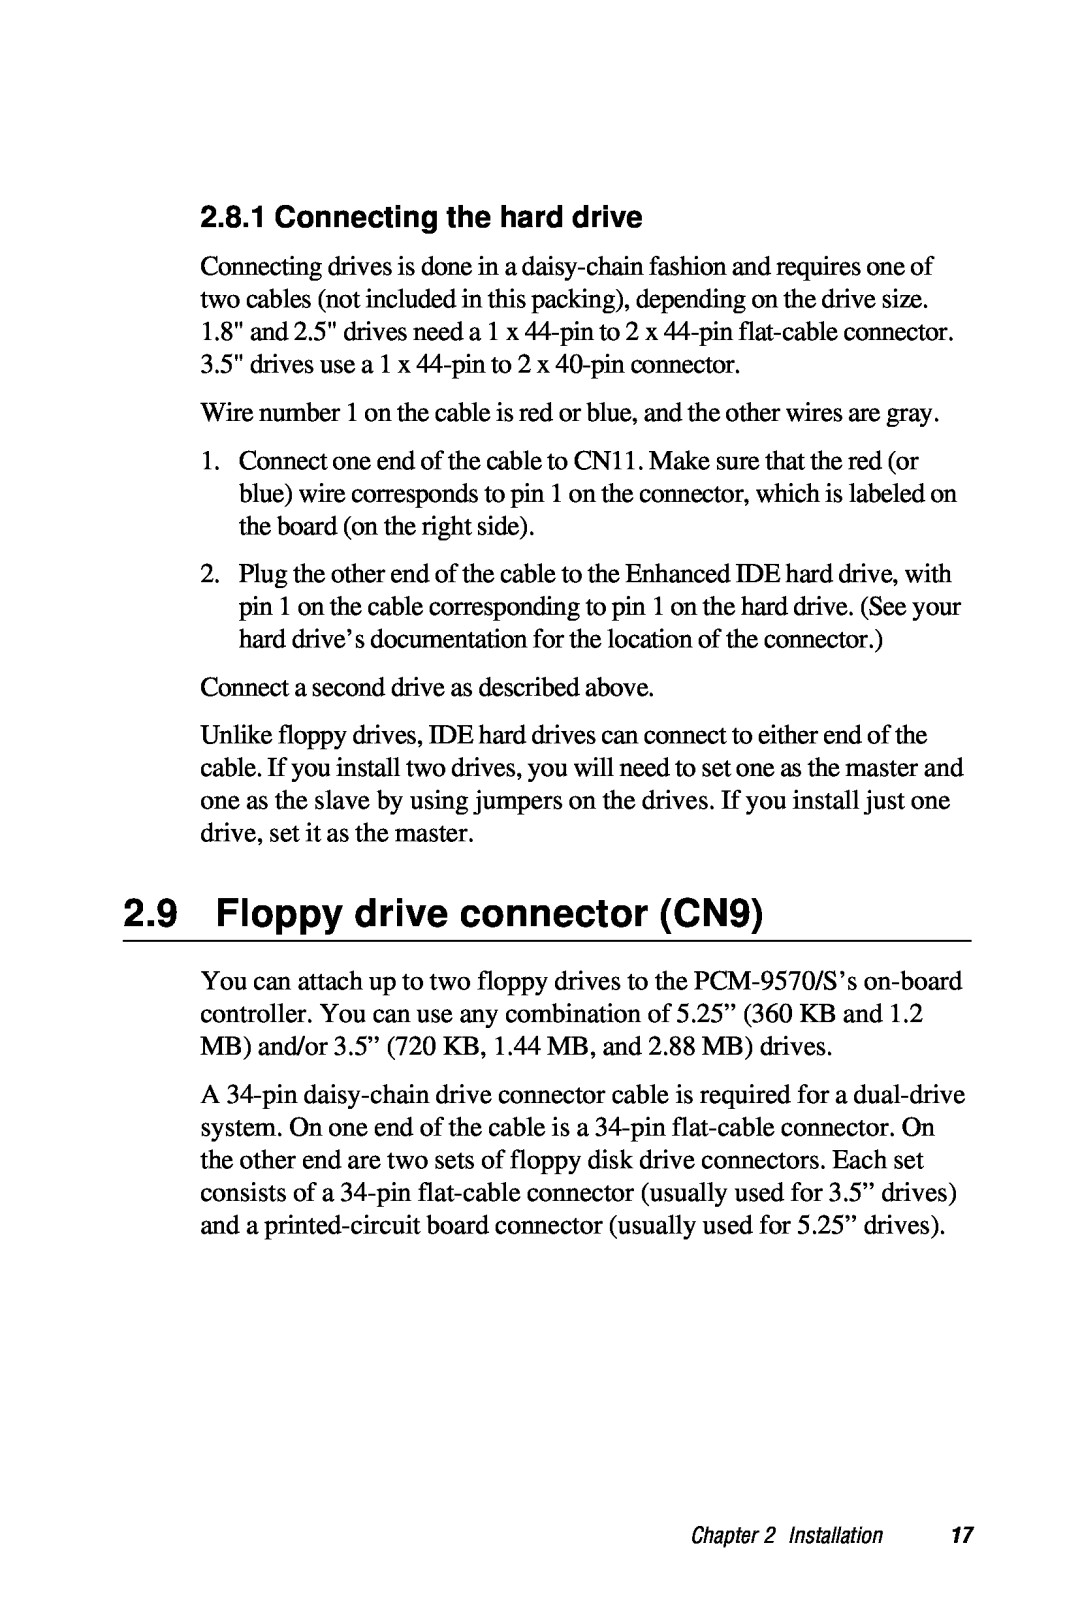 Advantech 2006957006 5th Edition user manual Floppy drive connector CN9, Connecting the hard drive 